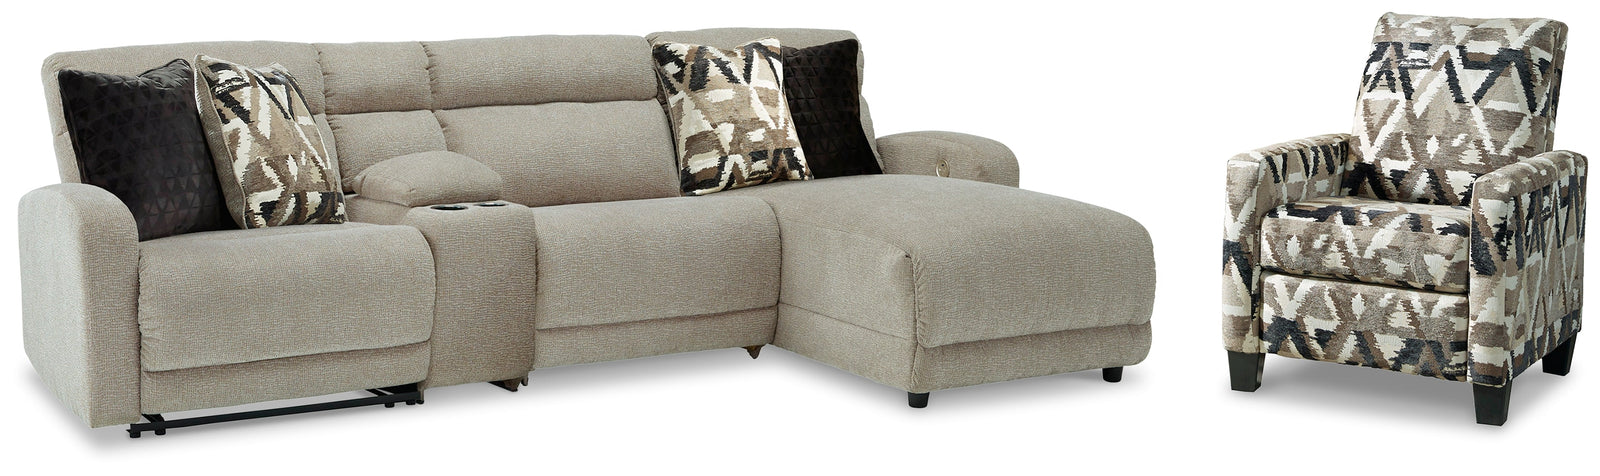 Colleyville Stone 4-Piece Sectional With Recliner PKG008157